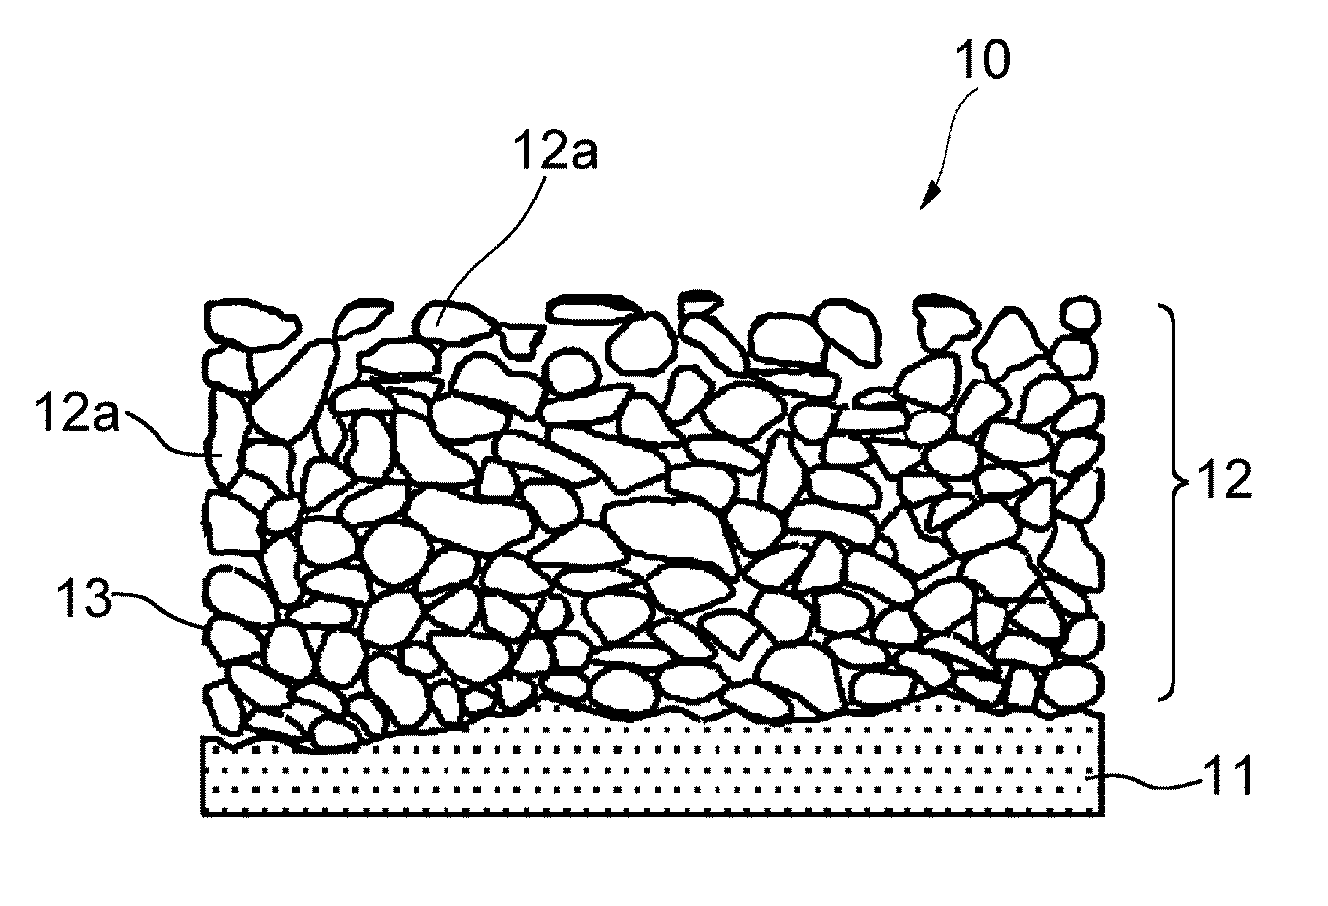 Nonaqueous secondary battery and method of producing the same